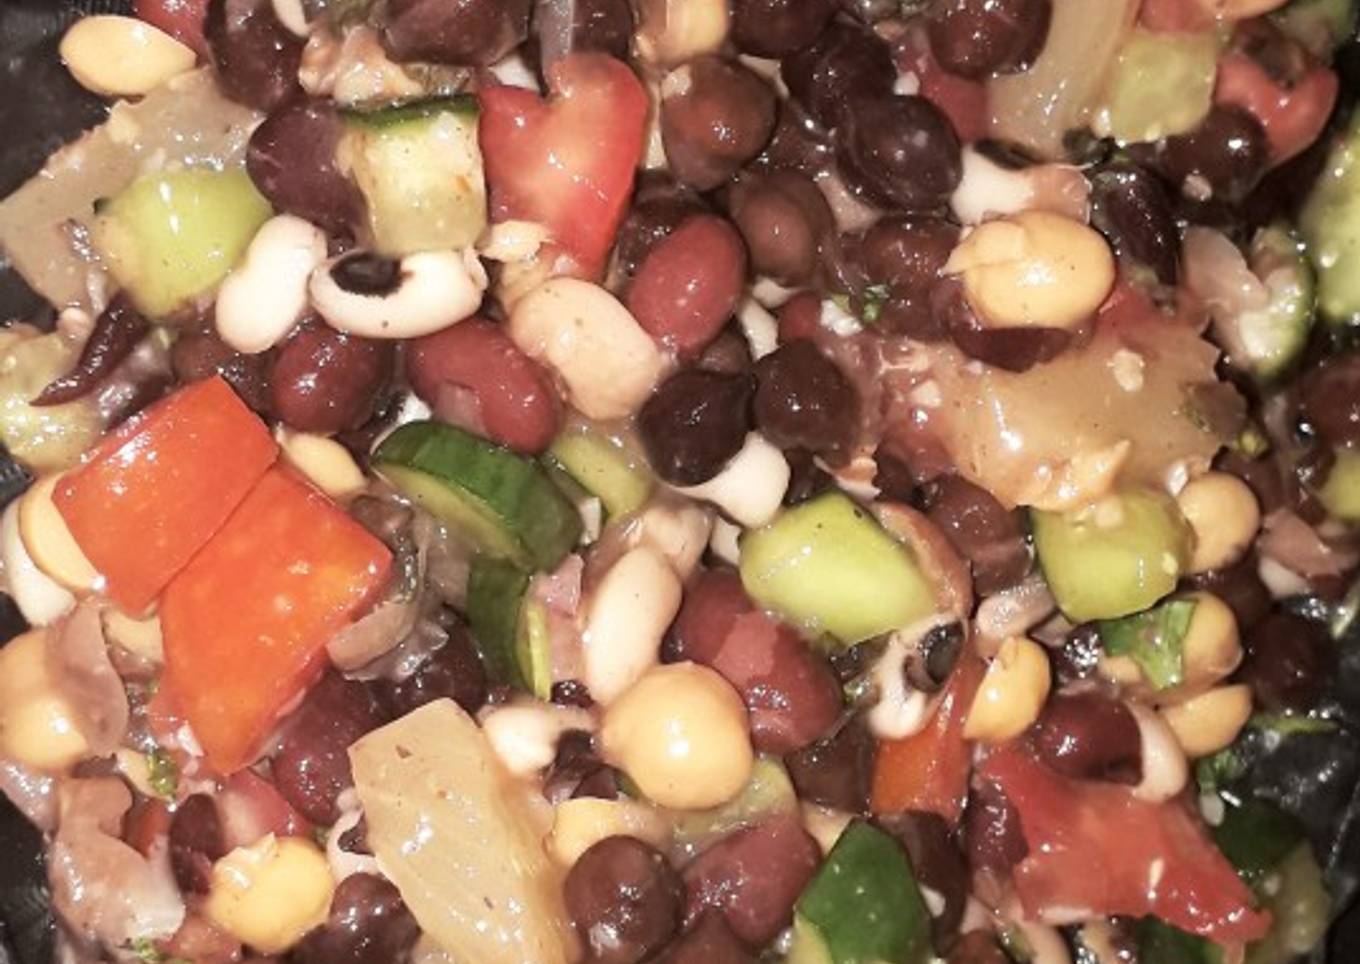 Veggies and fruits and beans and chickpea salad with lemon